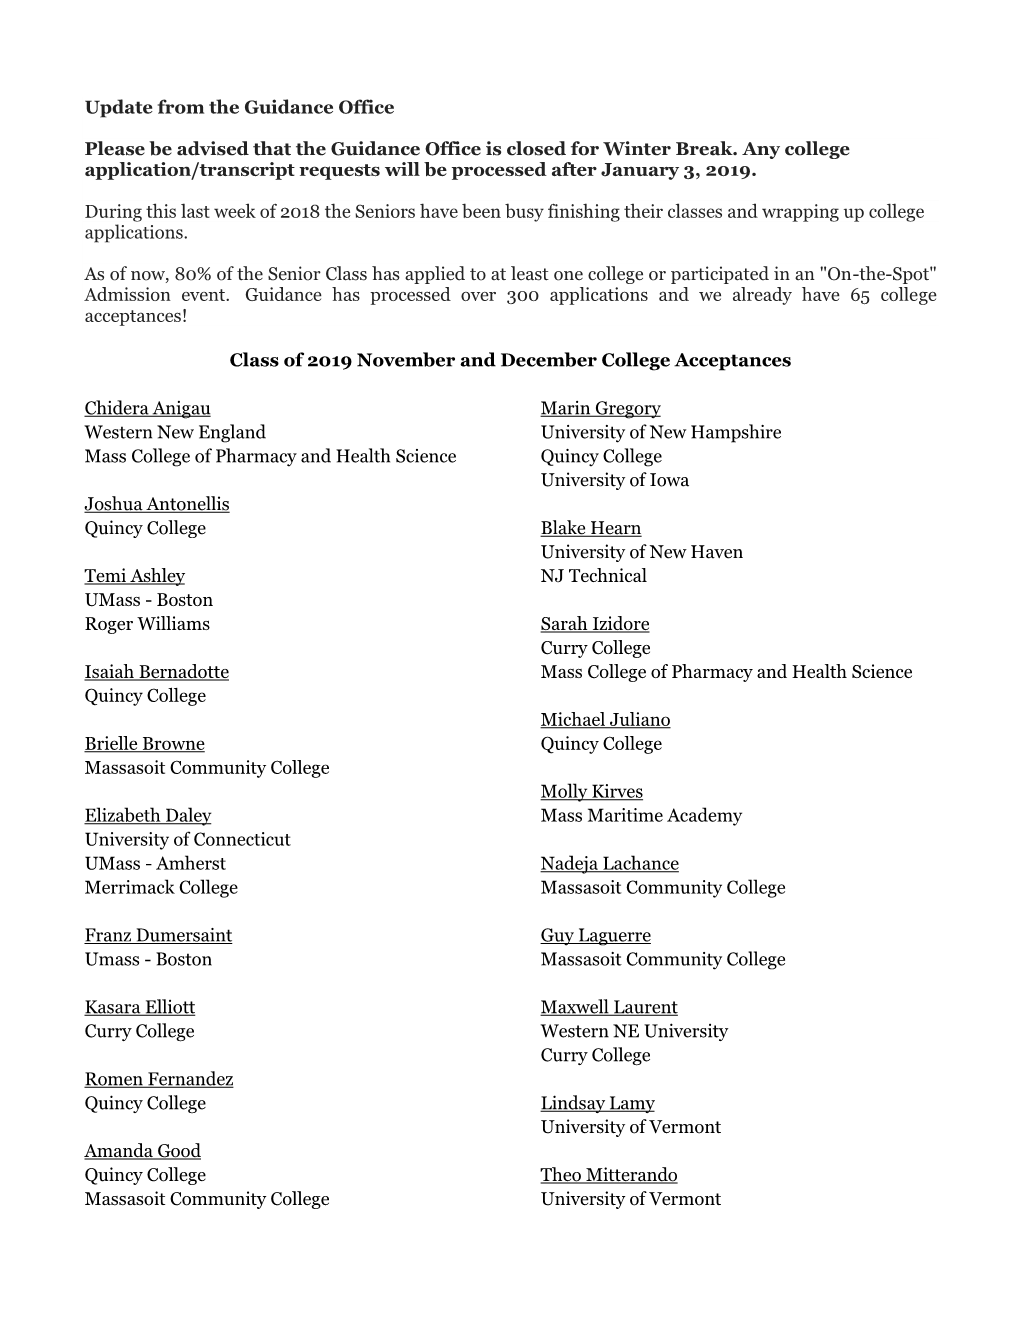 Class of 2019 November and December College Acceptances